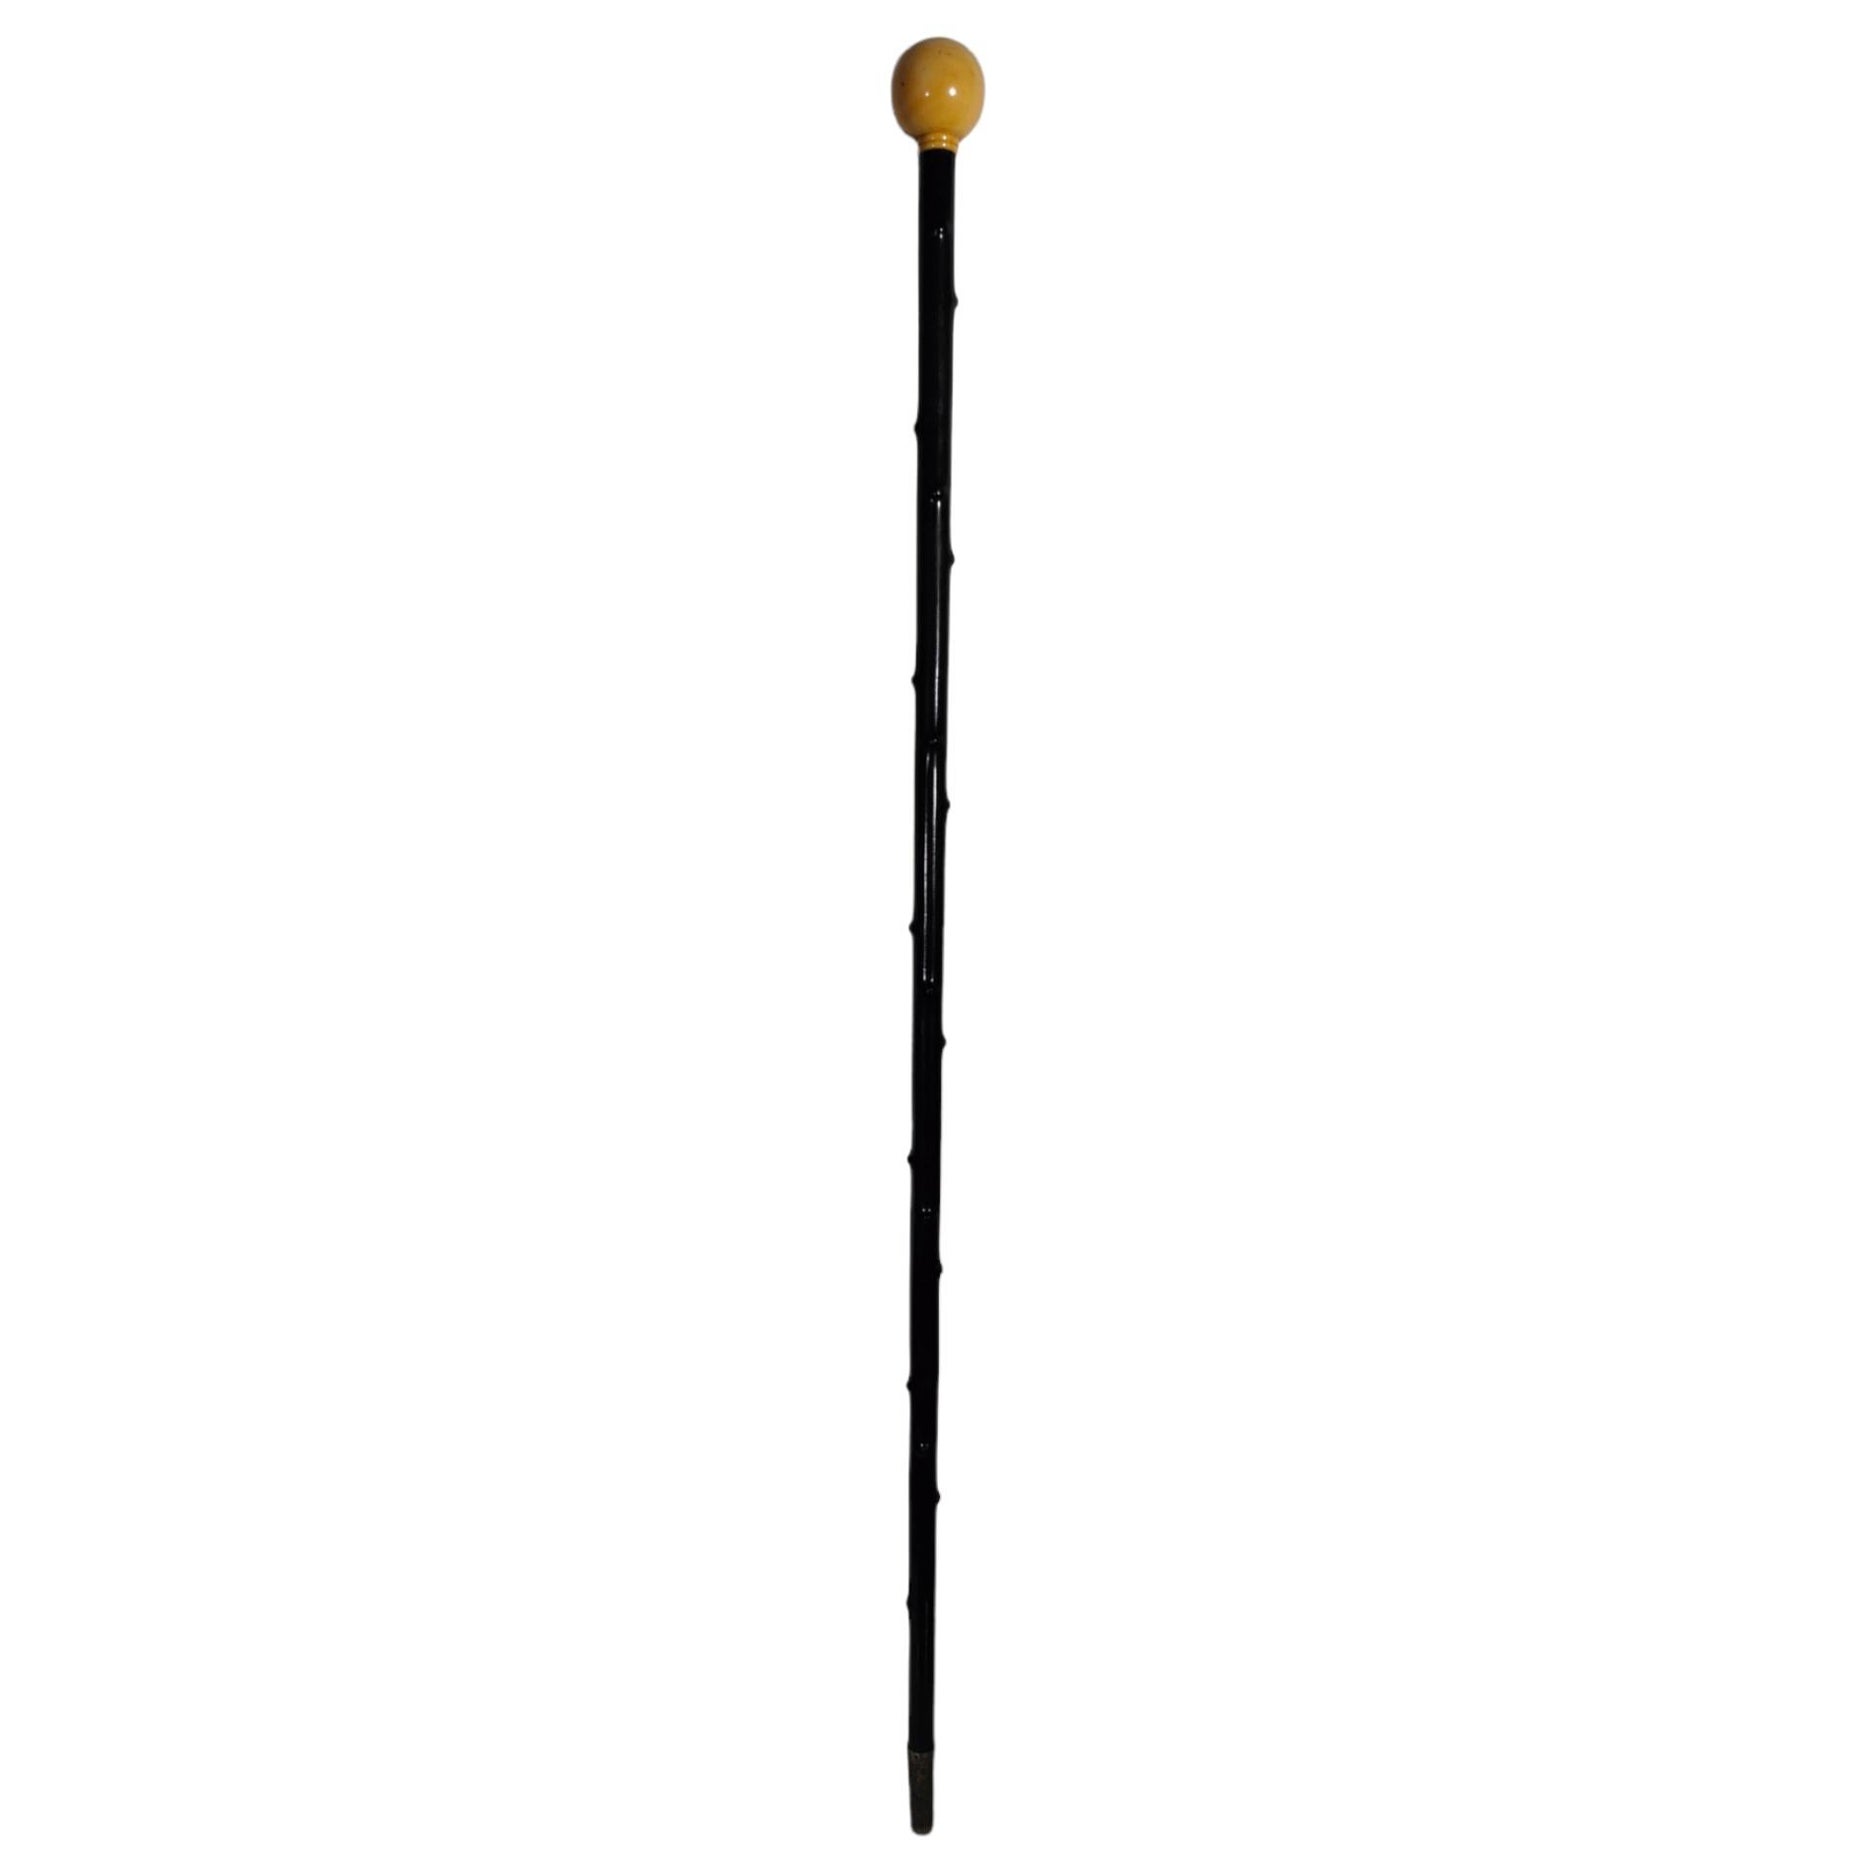 Old Cane From The XIX Century For Sale